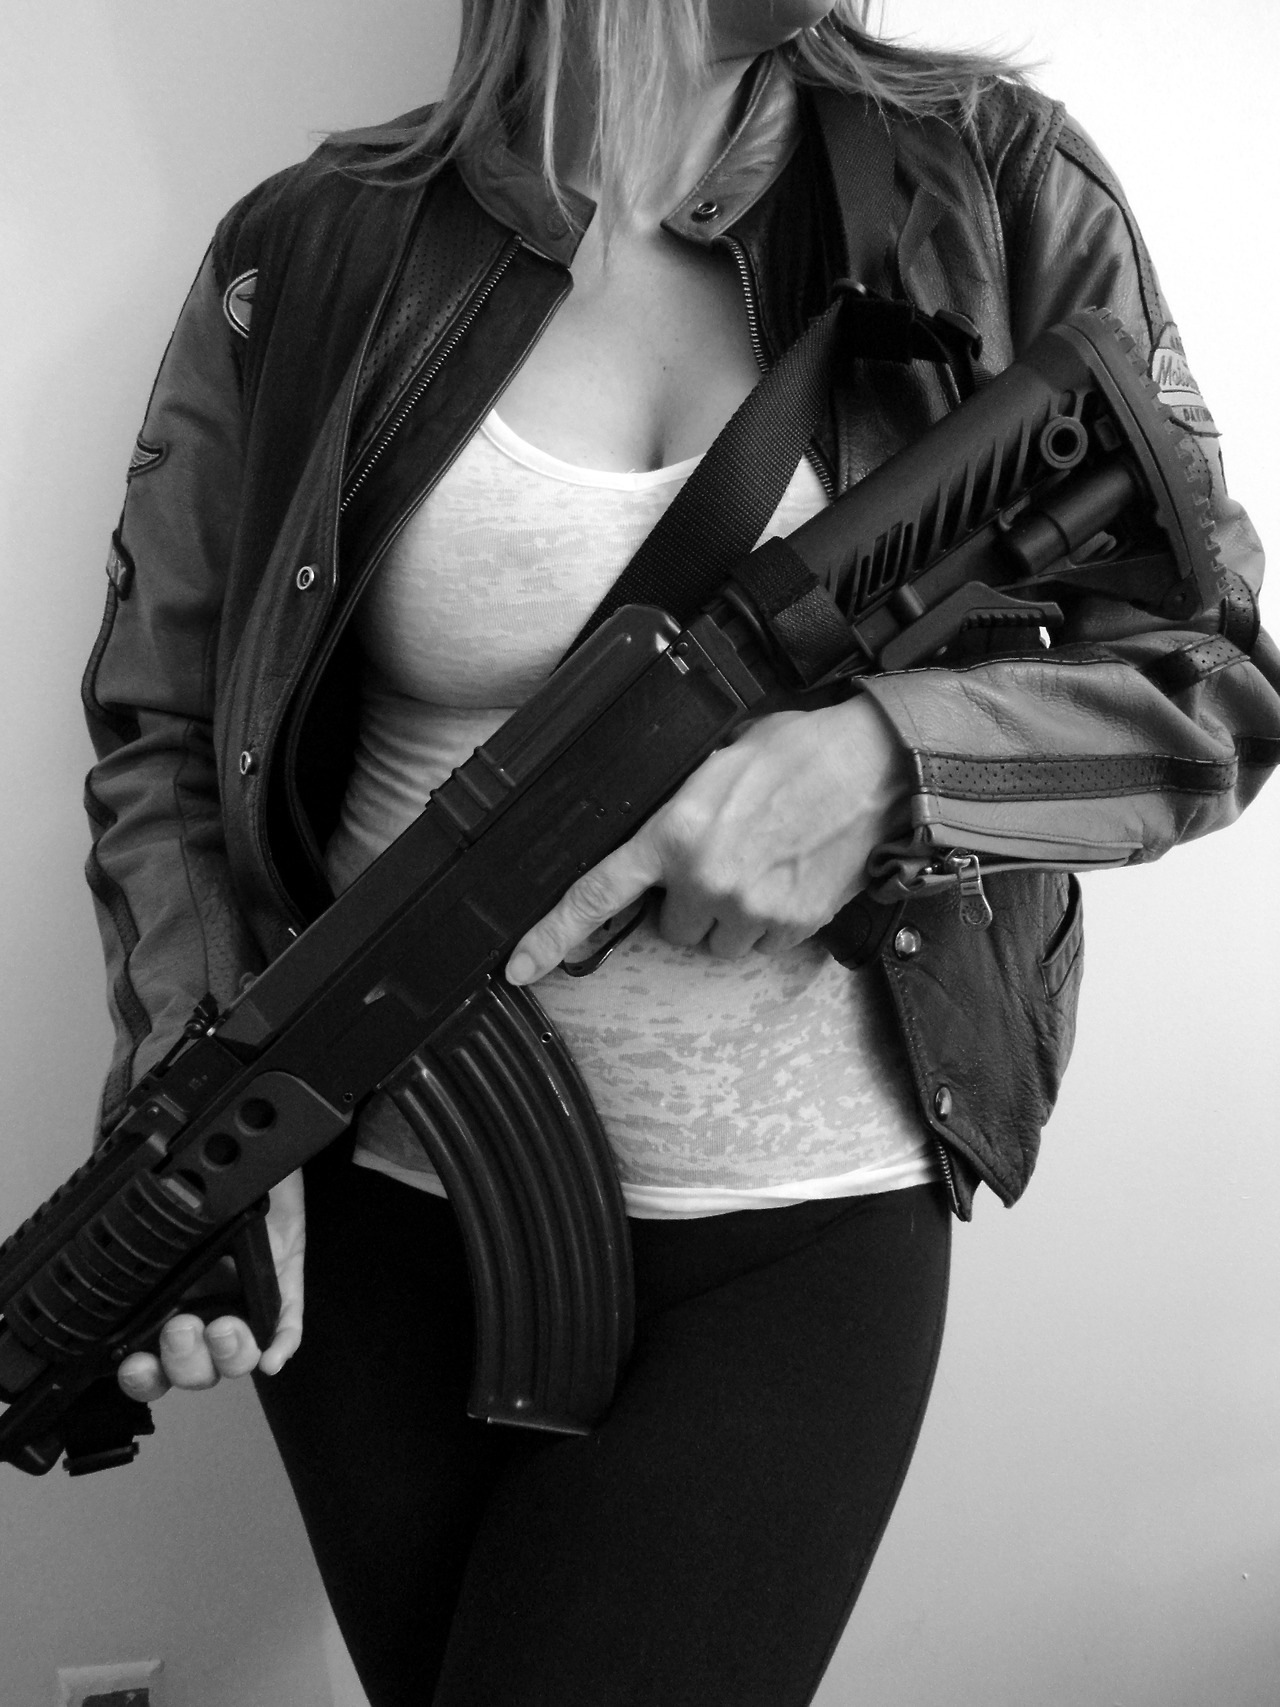 (NSFW) Girls and Guns (contains provocative pictures) Part 